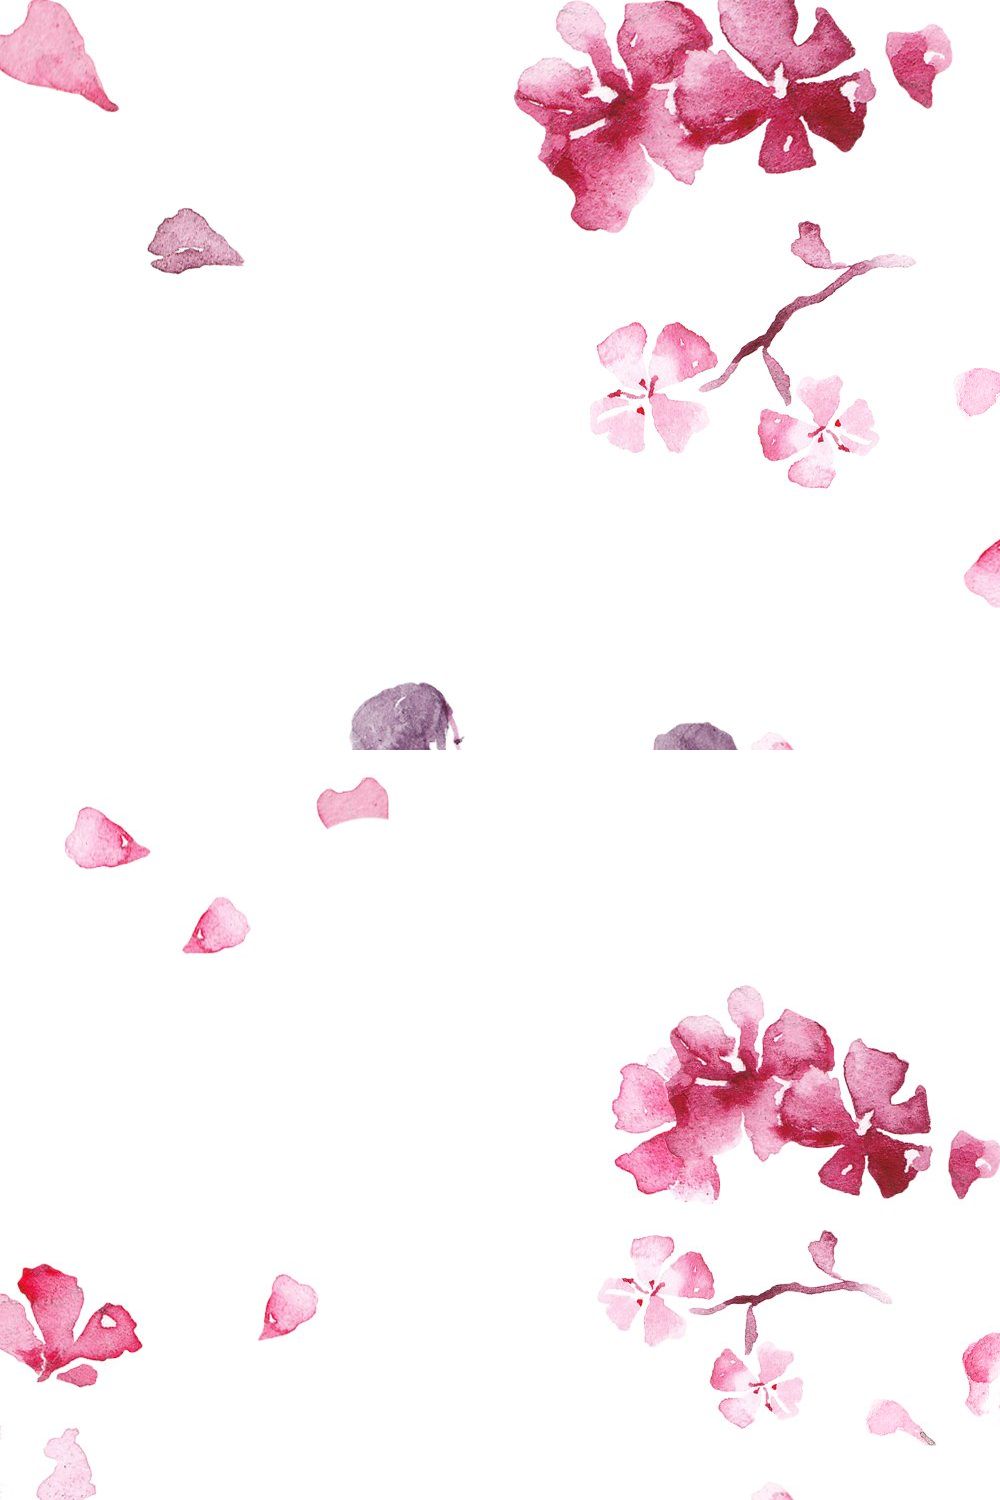 Cherry blossom pinterest preview image.